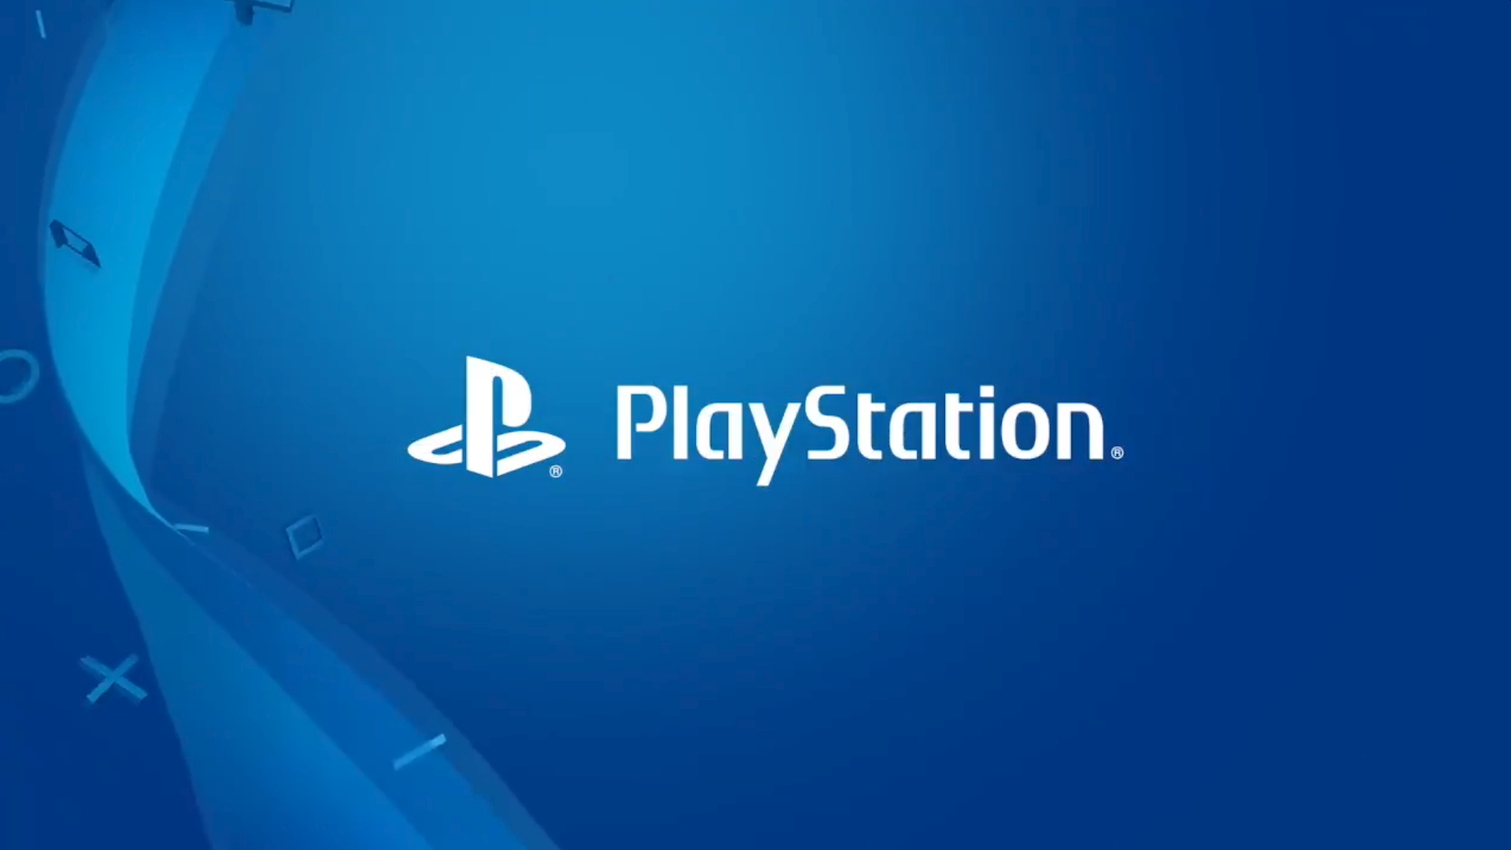 PlayStation Announces Fan Poll To Decide The Best New Game In March